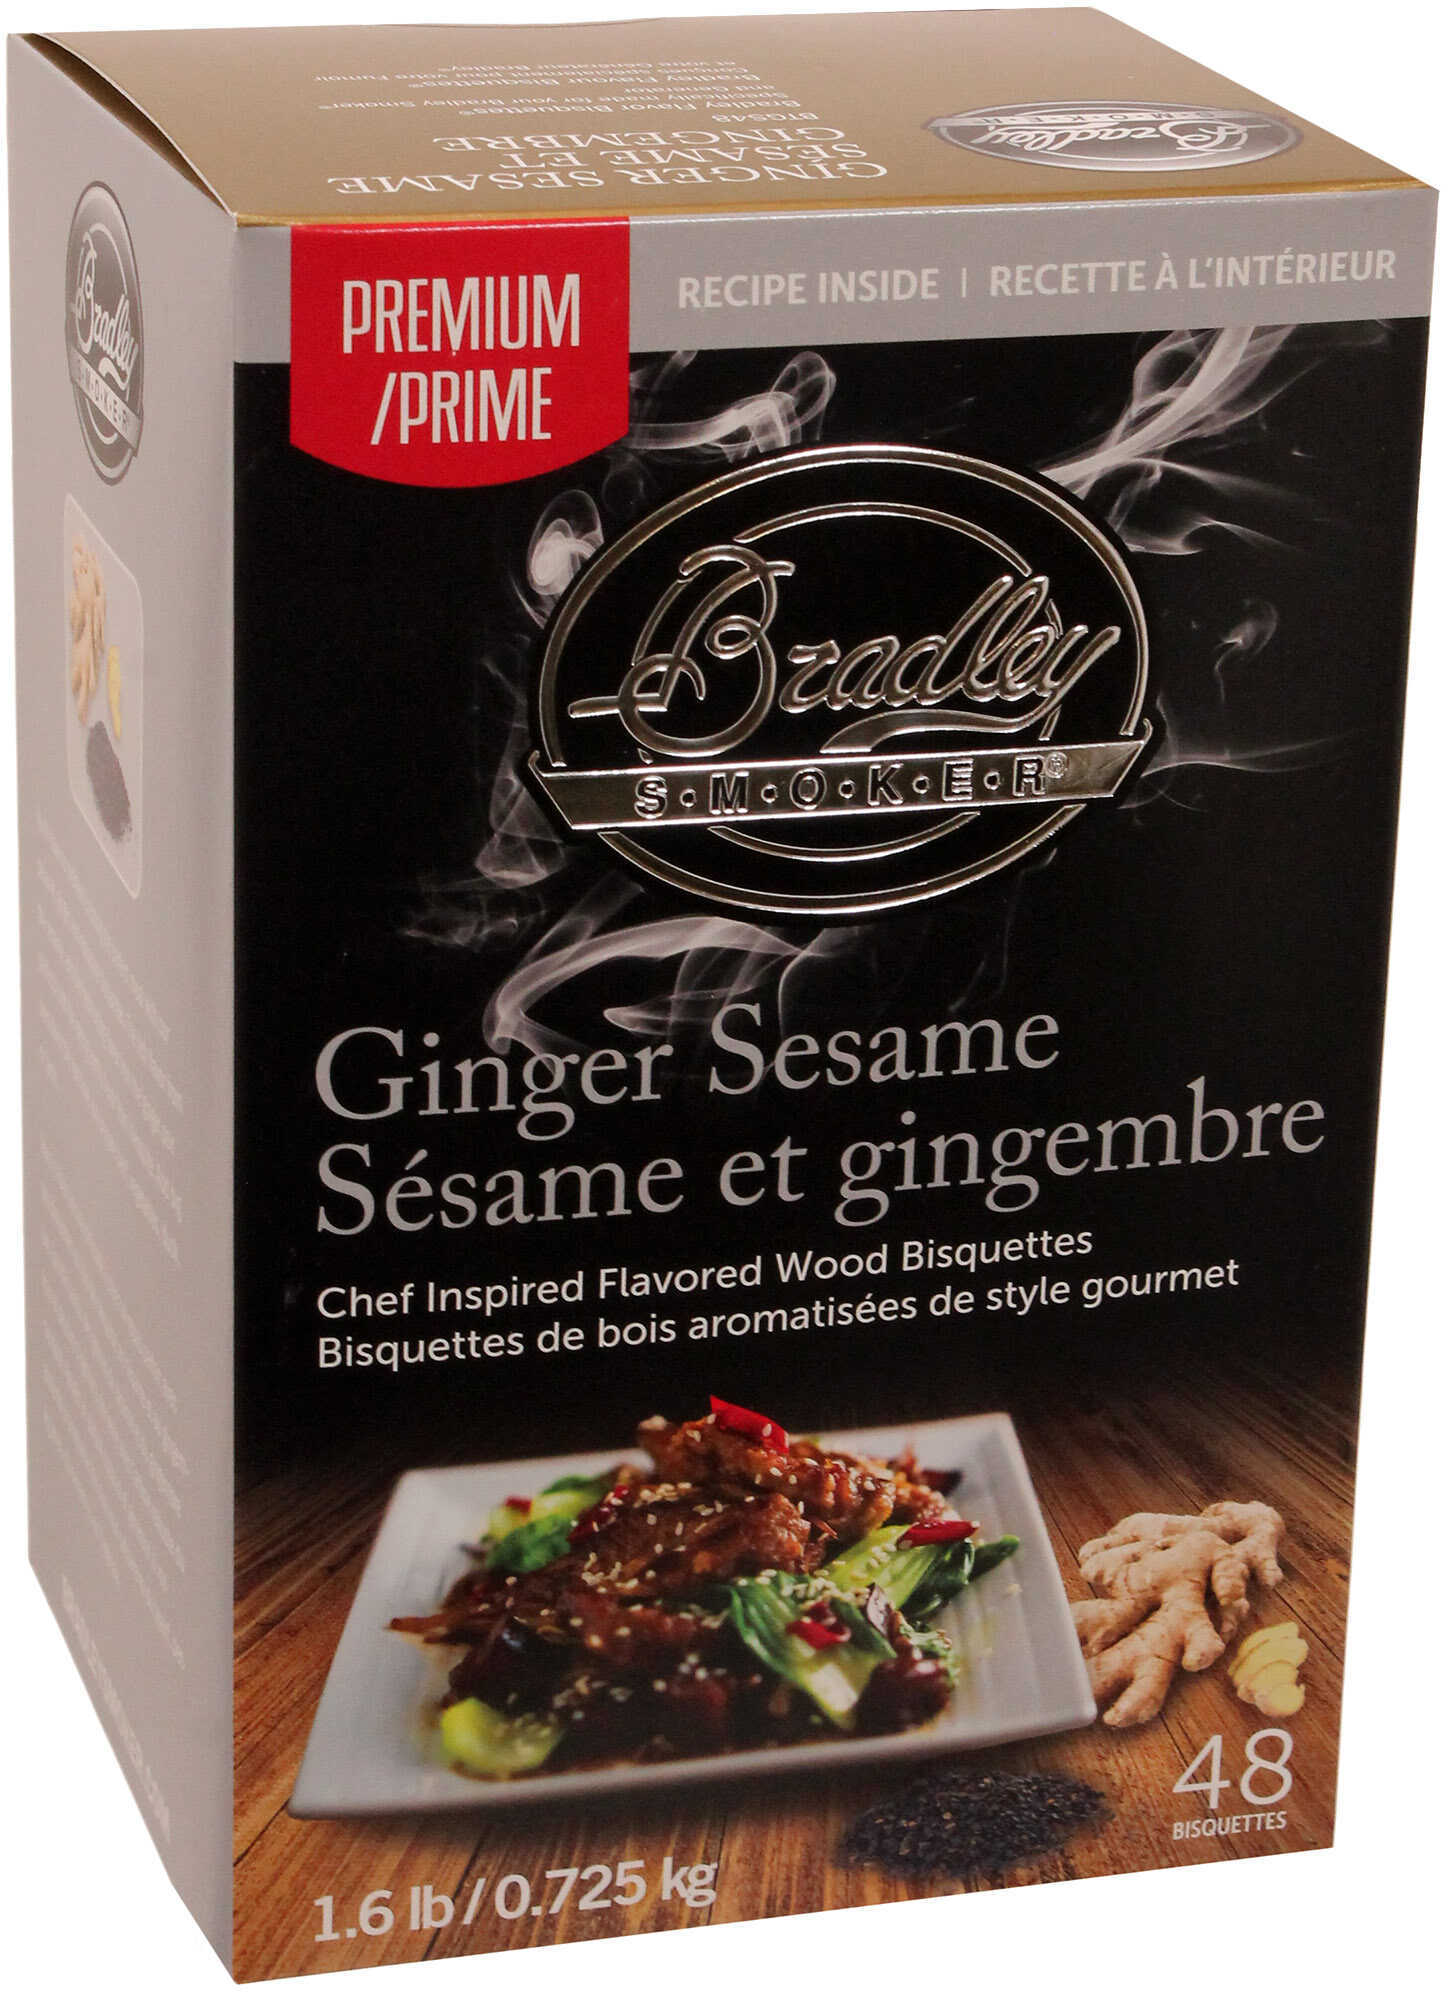 Bradley Technologies Smoker Bisquettes Ginger and Sesame, 48 Pack Md: BTGS48